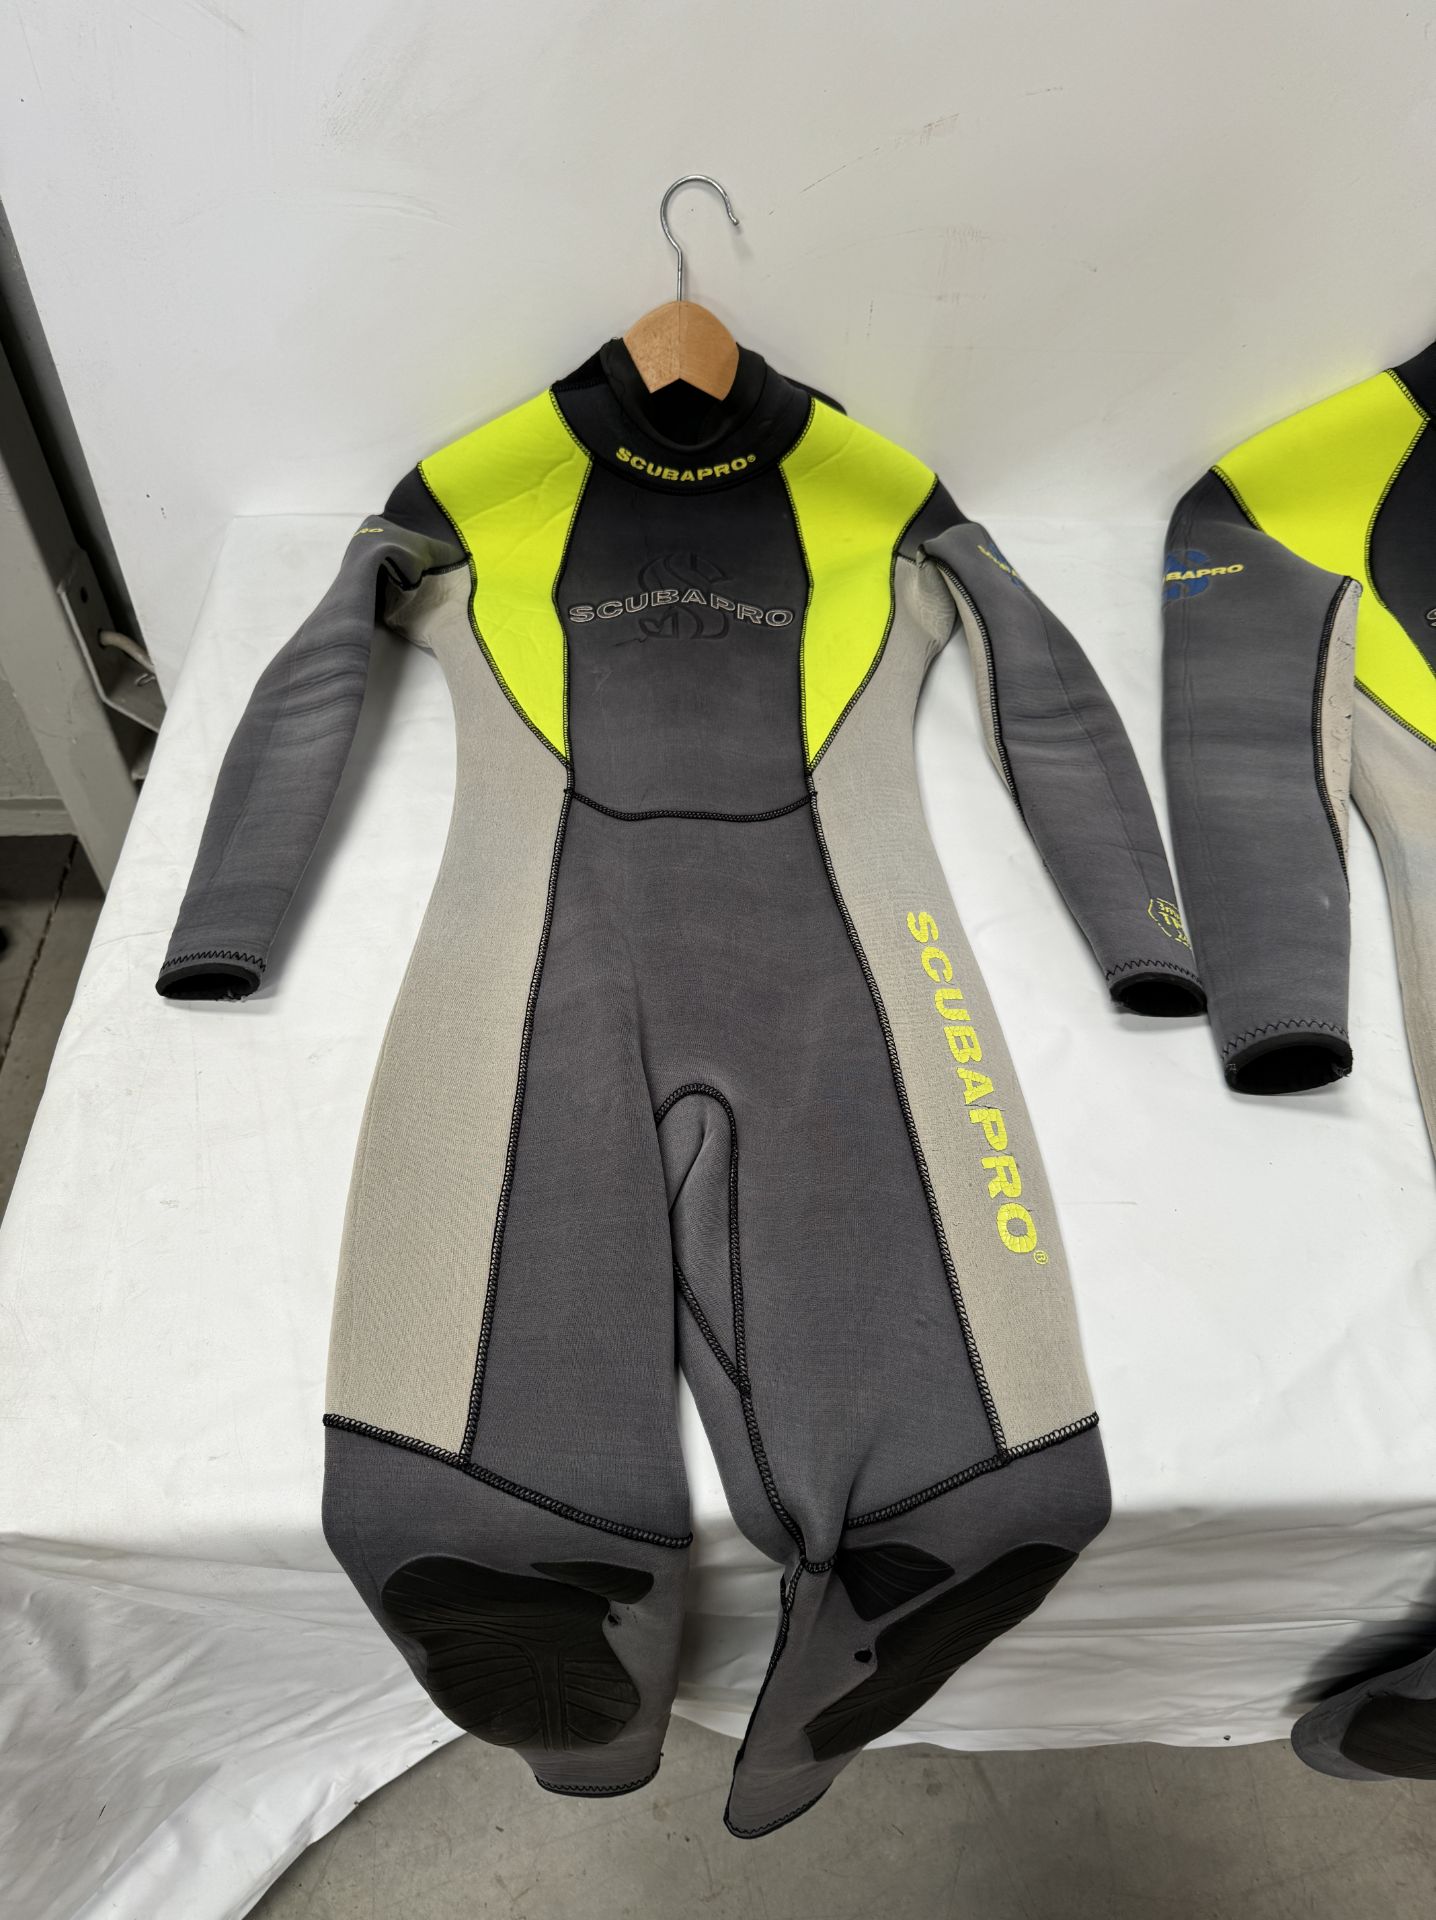 Three Scuba Pro Wetsuits (Location: Brentwood. Please Refer to General Notes) - Image 2 of 5